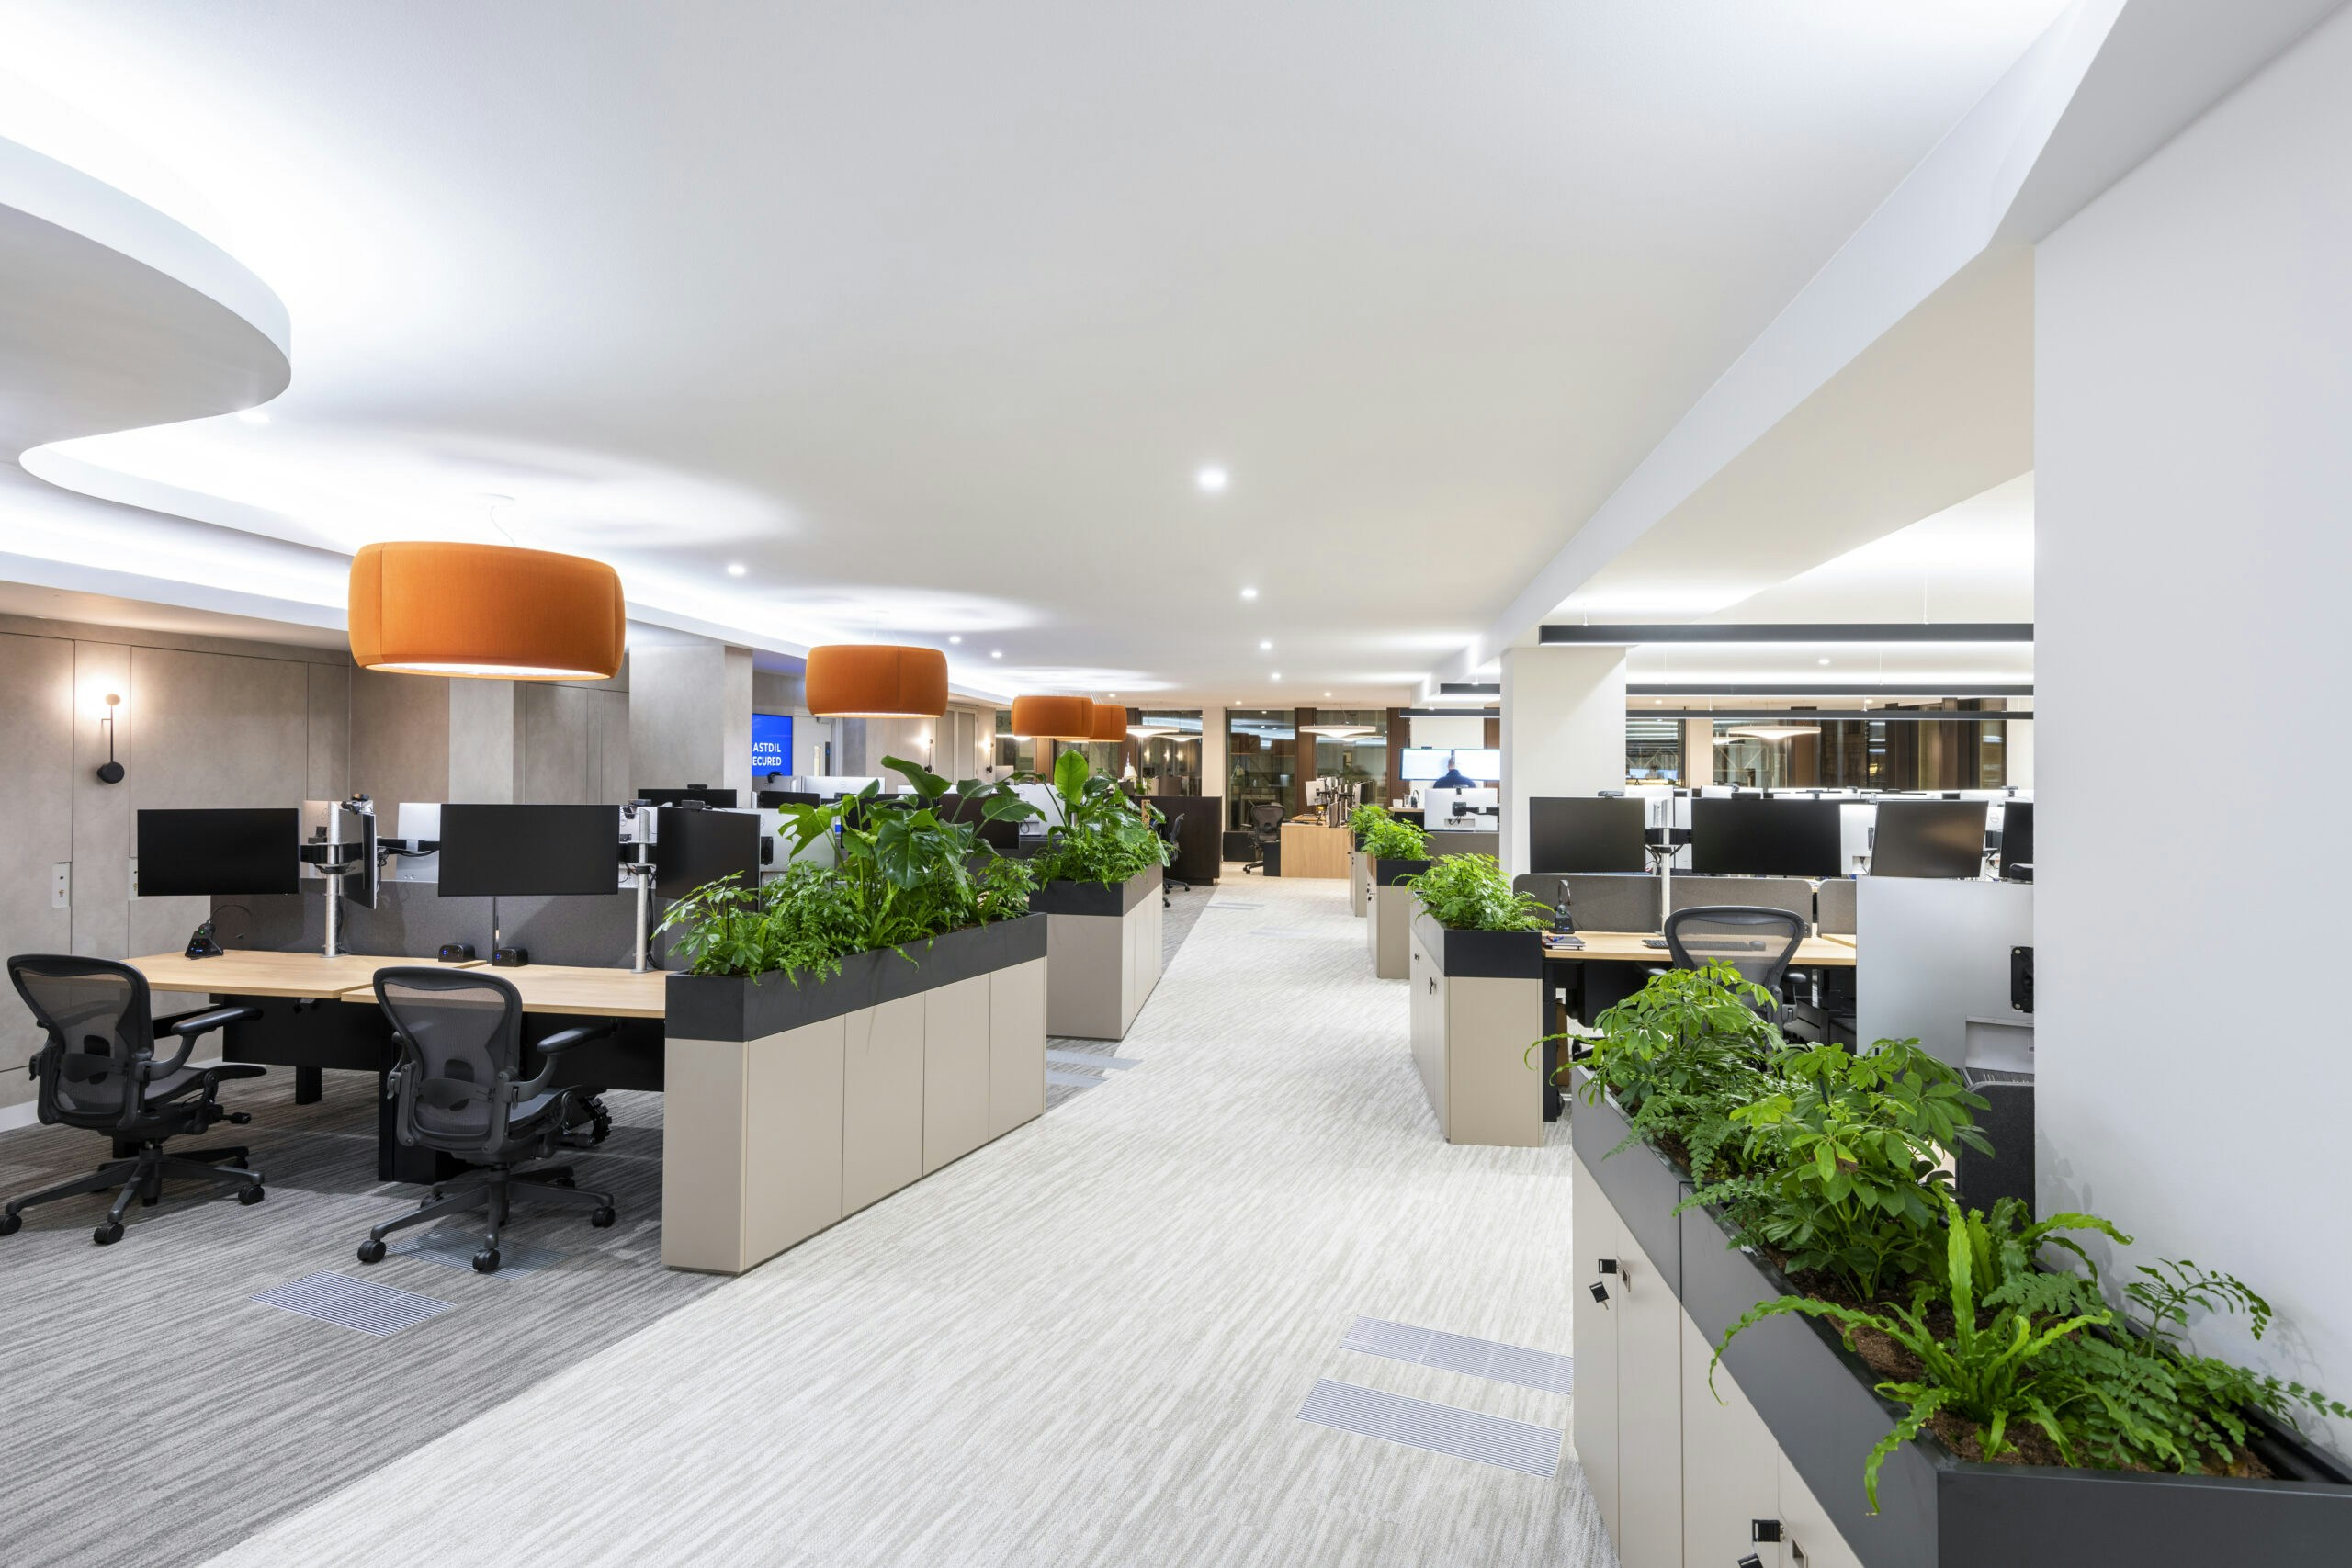 Award winning office fit out company